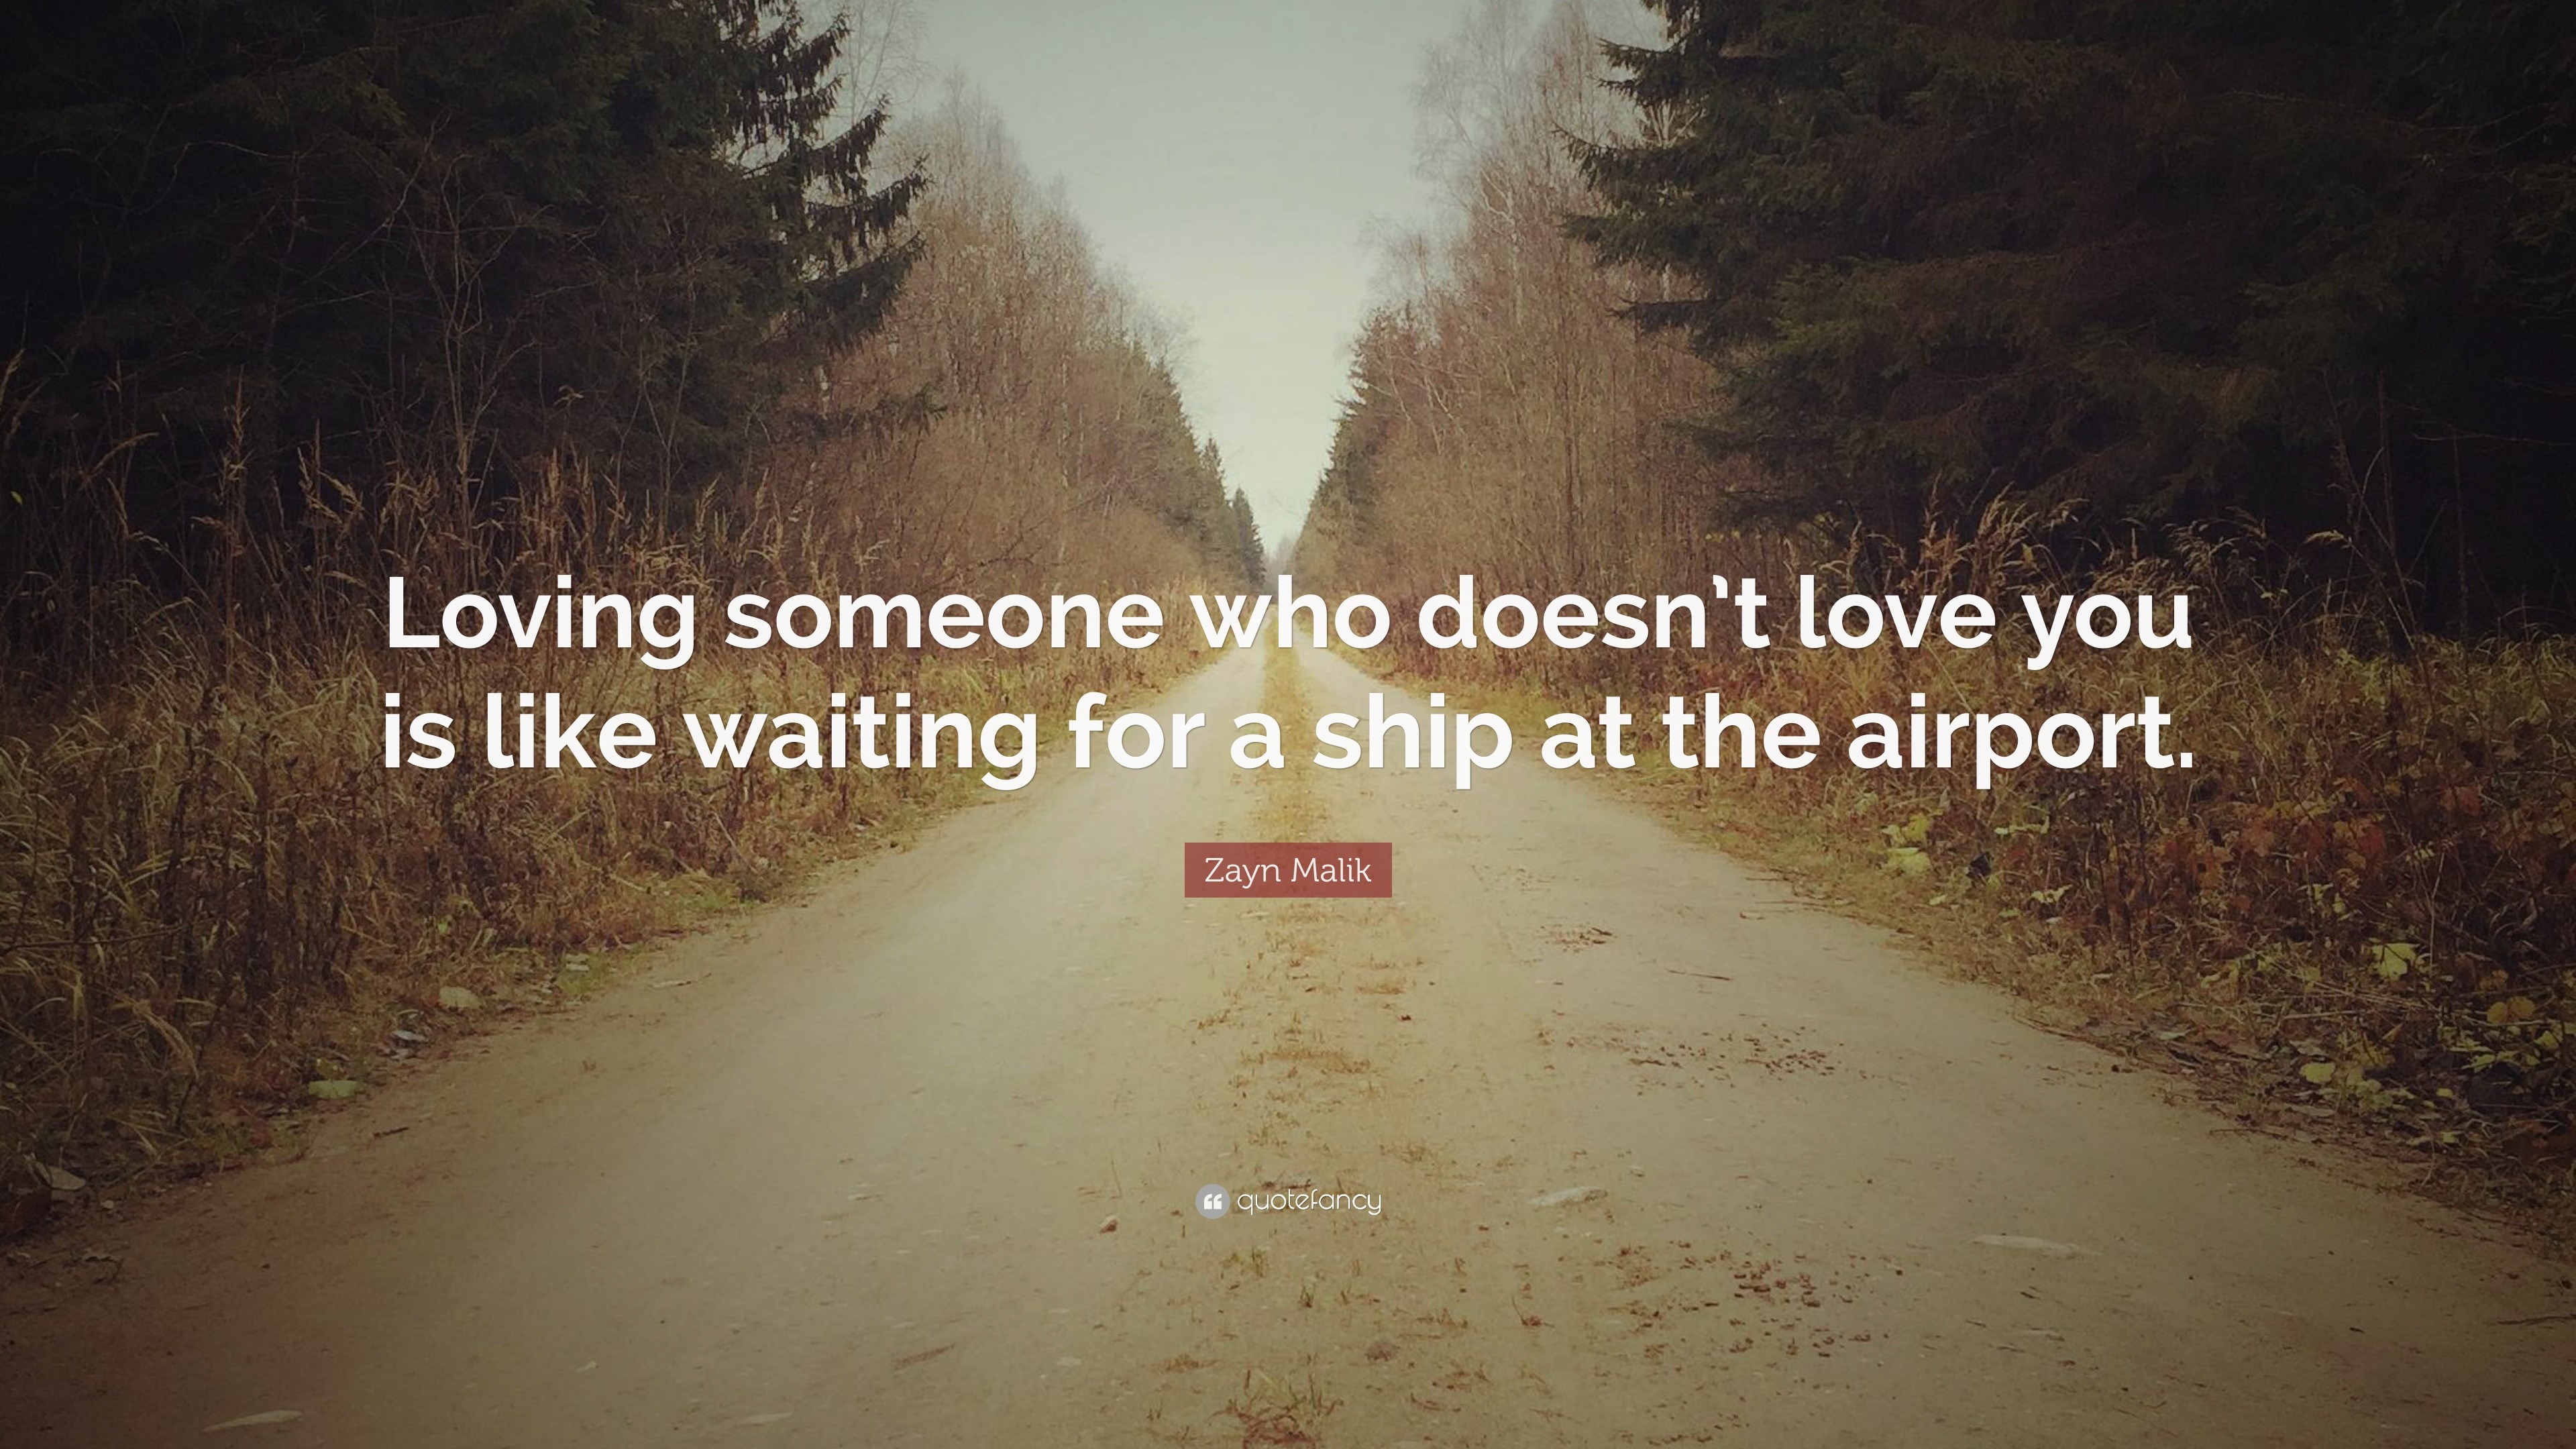 Zayn Malik Quote: "Loving someone who doesn't love you is like waiting for a ship at the airport ...